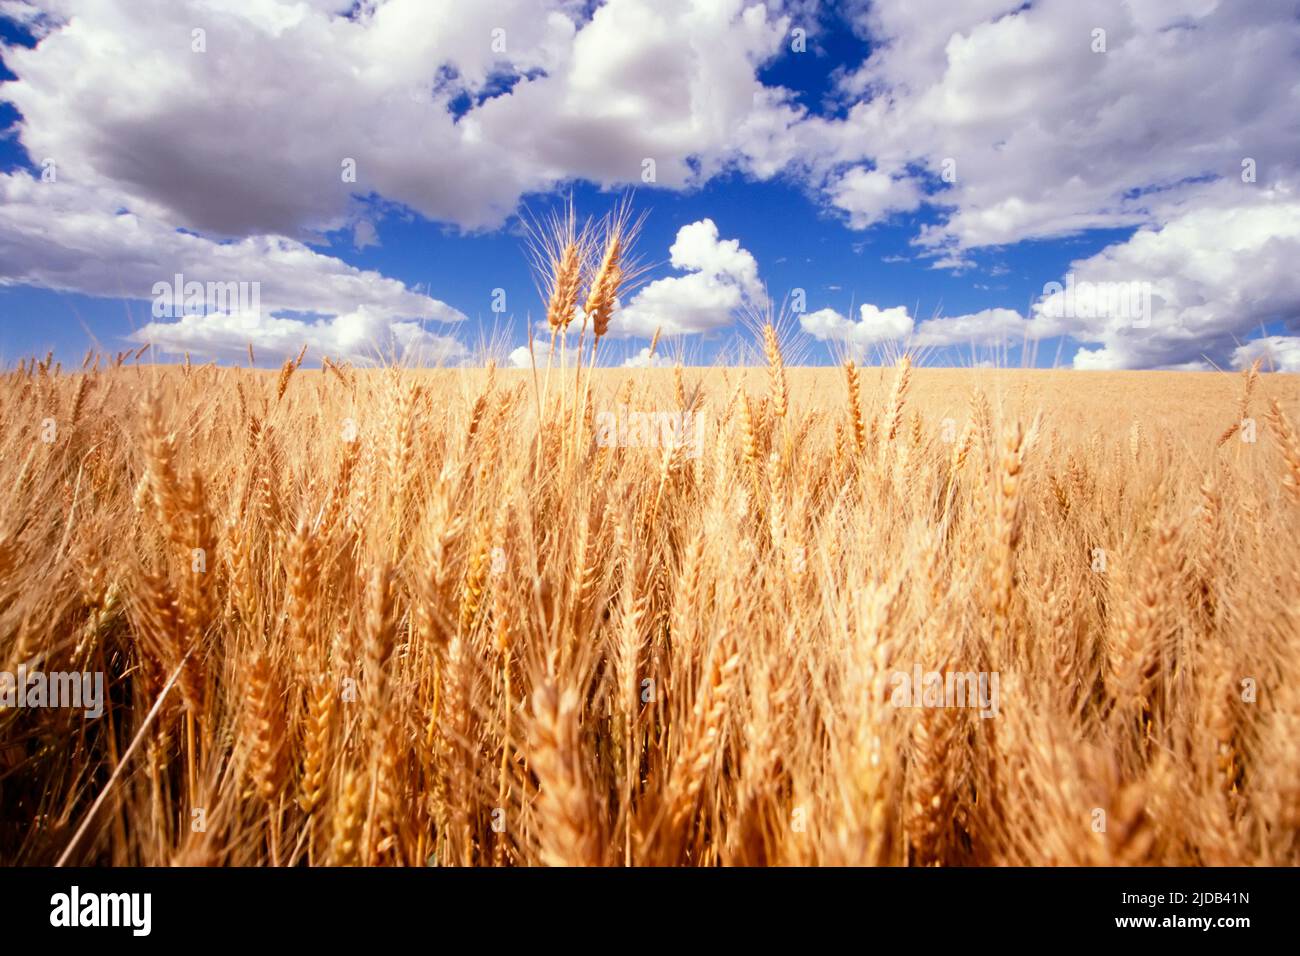 Golden wheat field growing beneath puffy clouds in a blue sky with wheat stalks standing up against the horizon Stock Photo